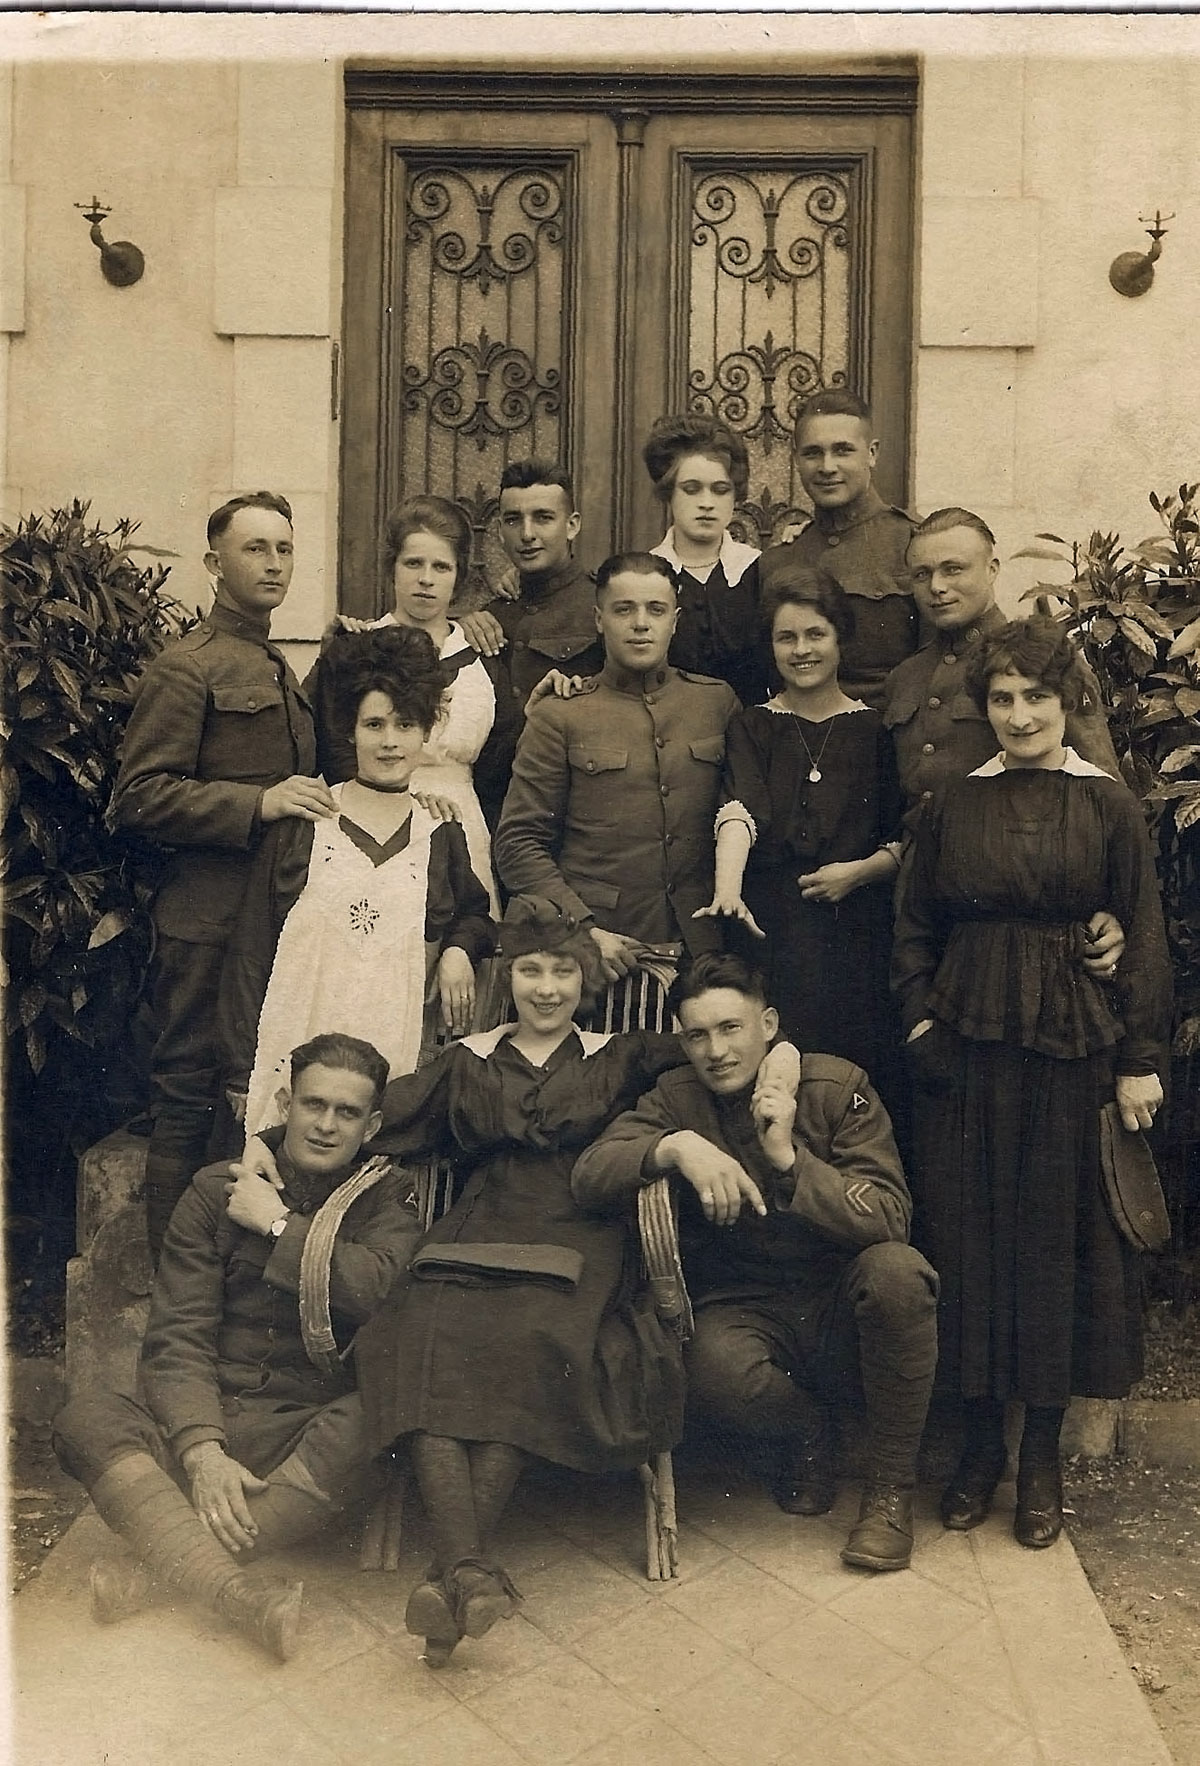 My grandfather (standing far left) and friends in France during WWI posing with some of the local French beauties. View full size.